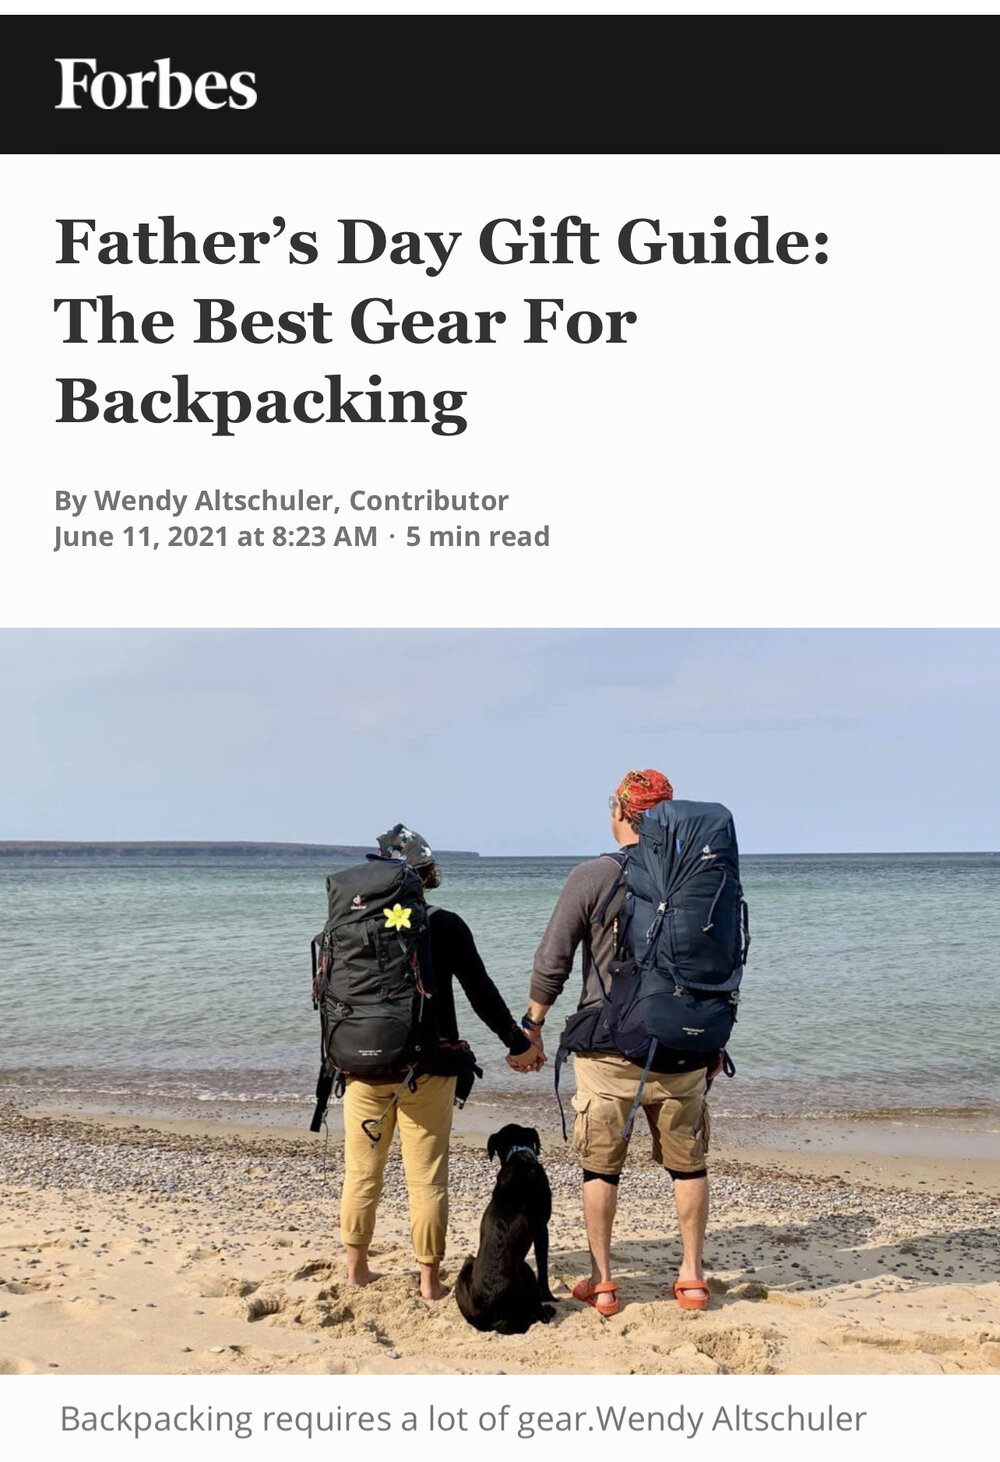 Father’s Day Gift Guide: The Best Gear For Backpacking